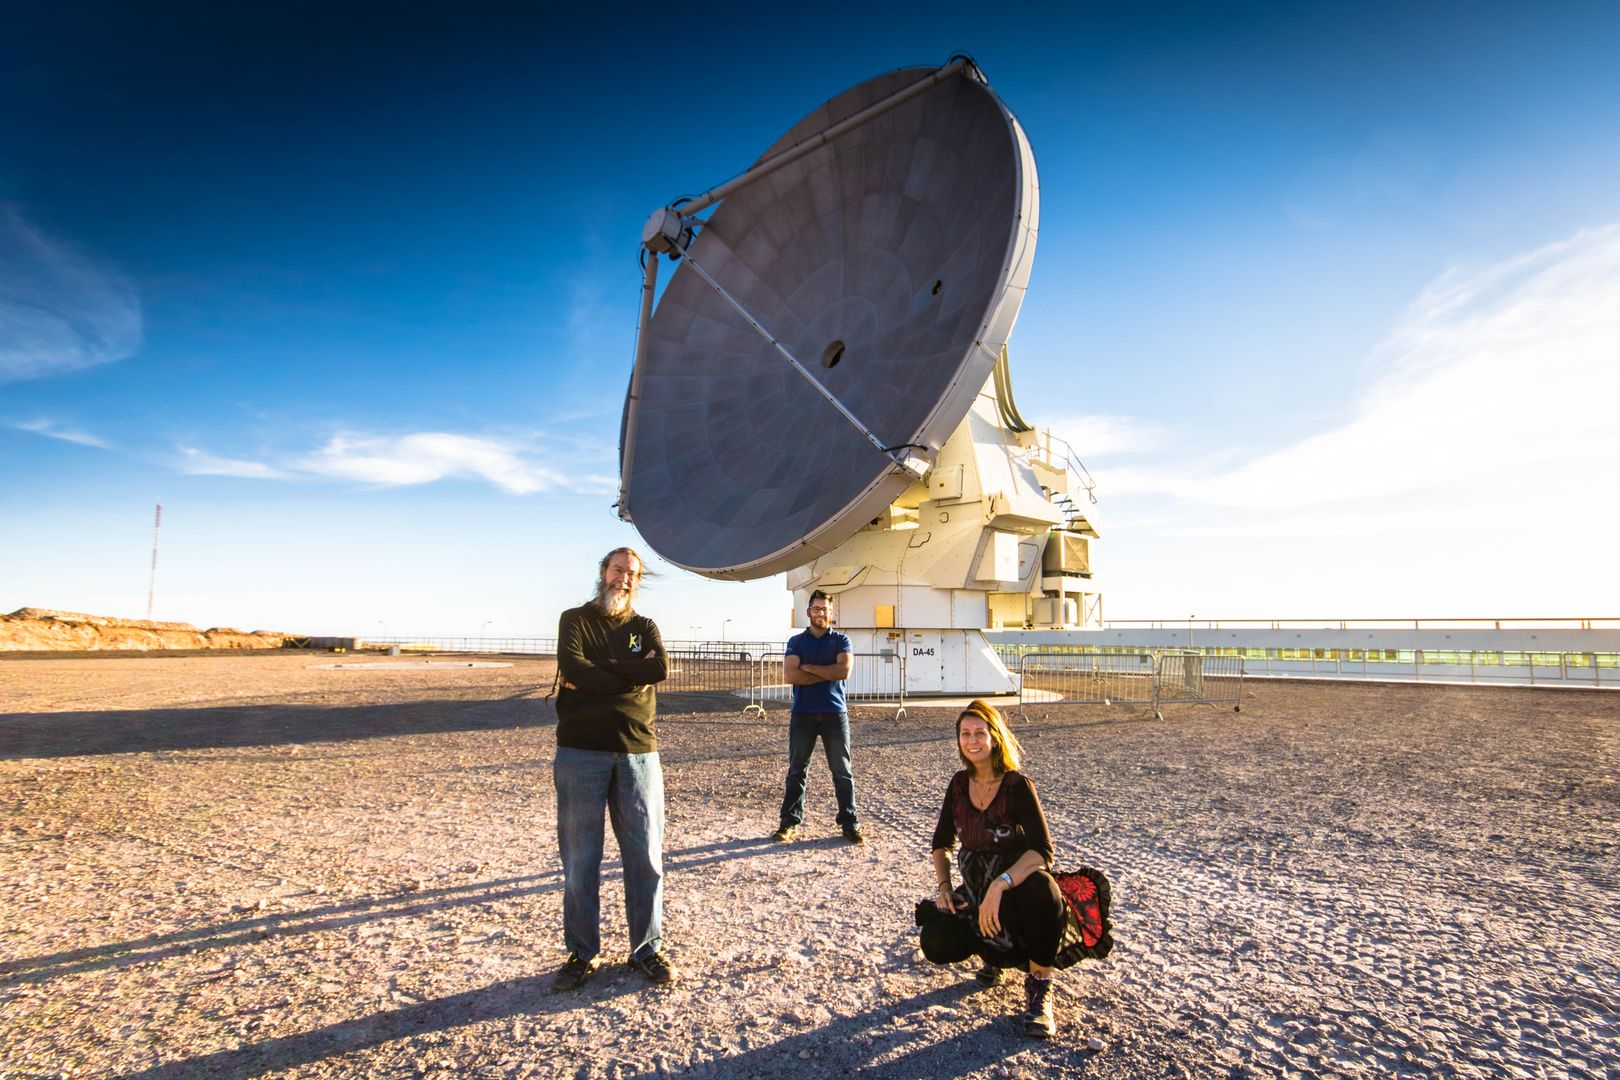 <p>Part of the team that participated in the VLBI observations with ALMA. From left to right: Geoff Crew, Ciriaco Goddi, and Violette Impellizzeri. Credit: Helge Rottman</p>
